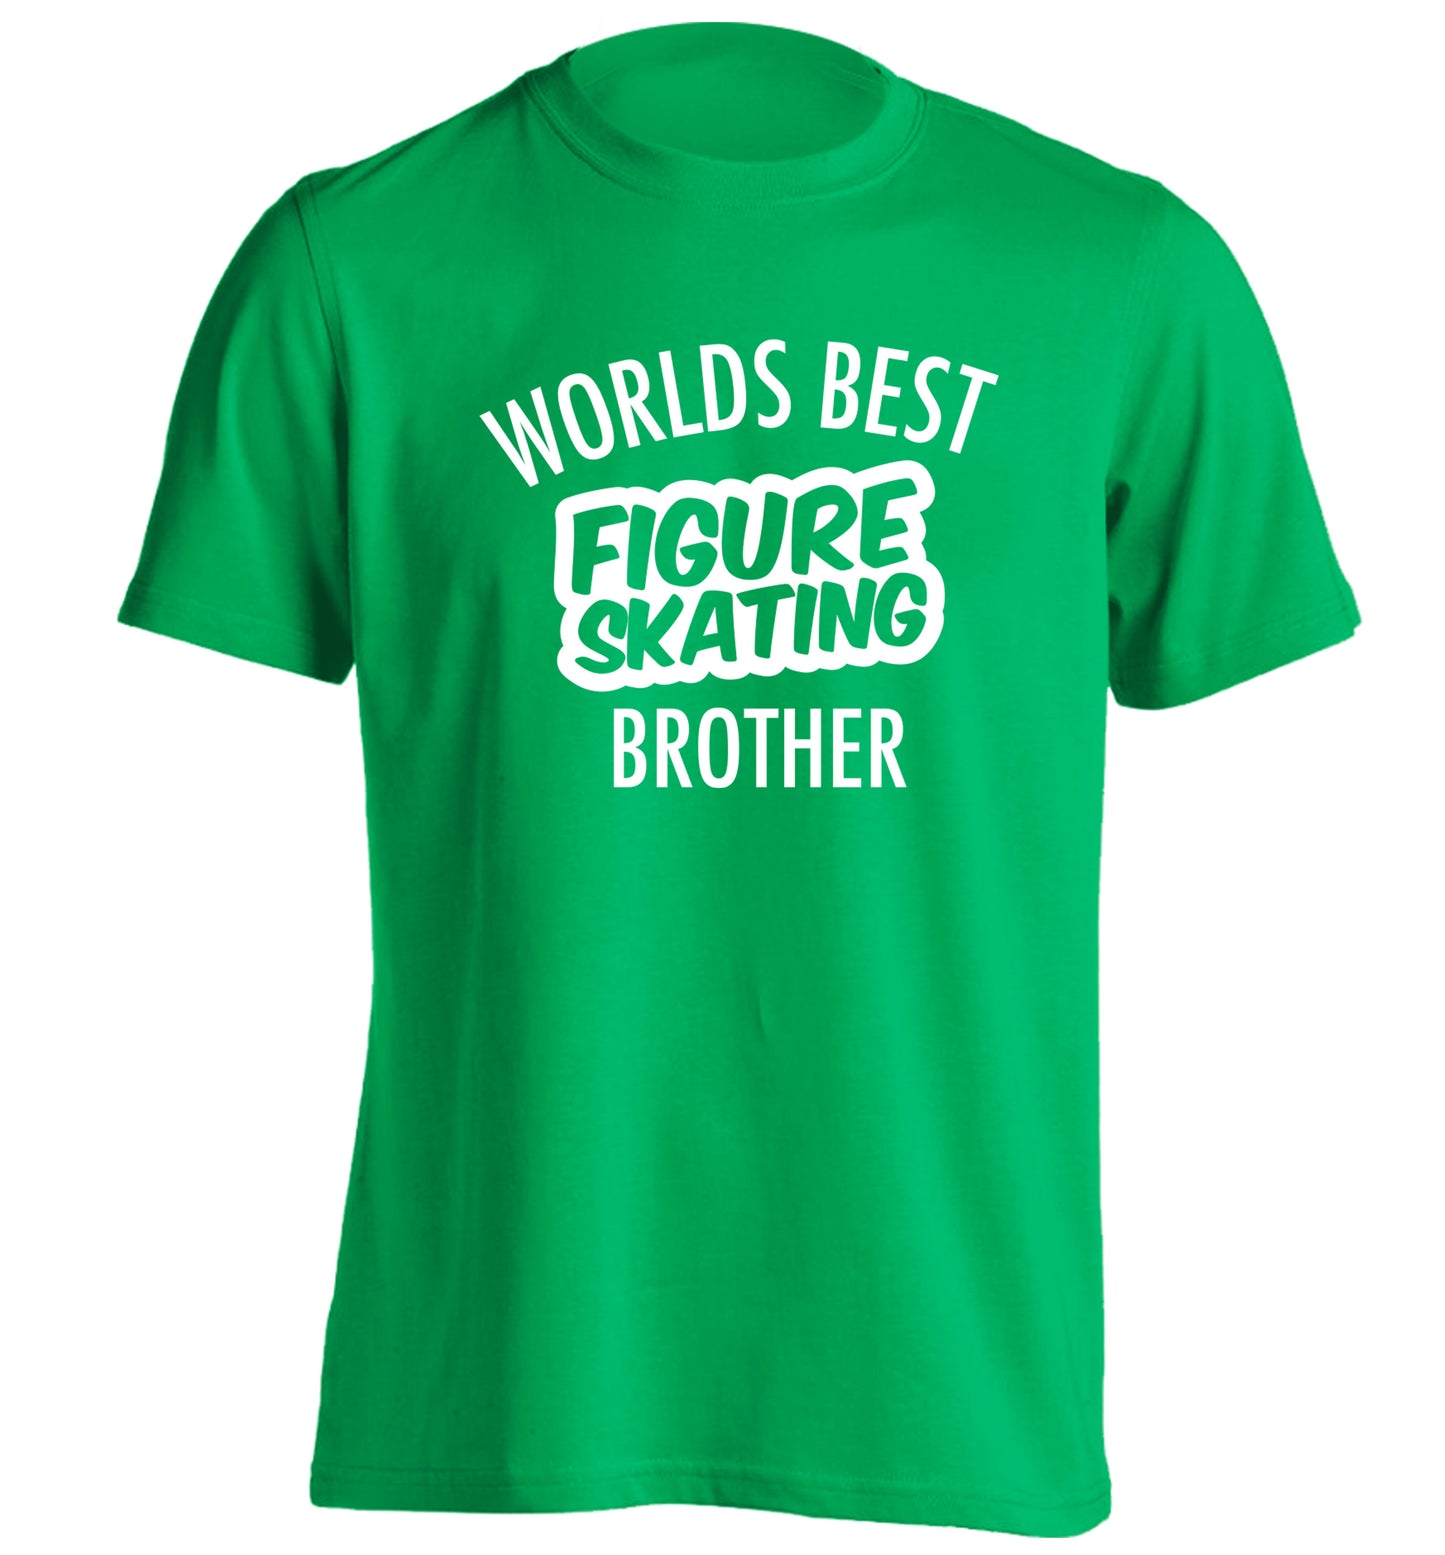 Worlds best figure skating brother adults unisexgreen Tshirt 2XL